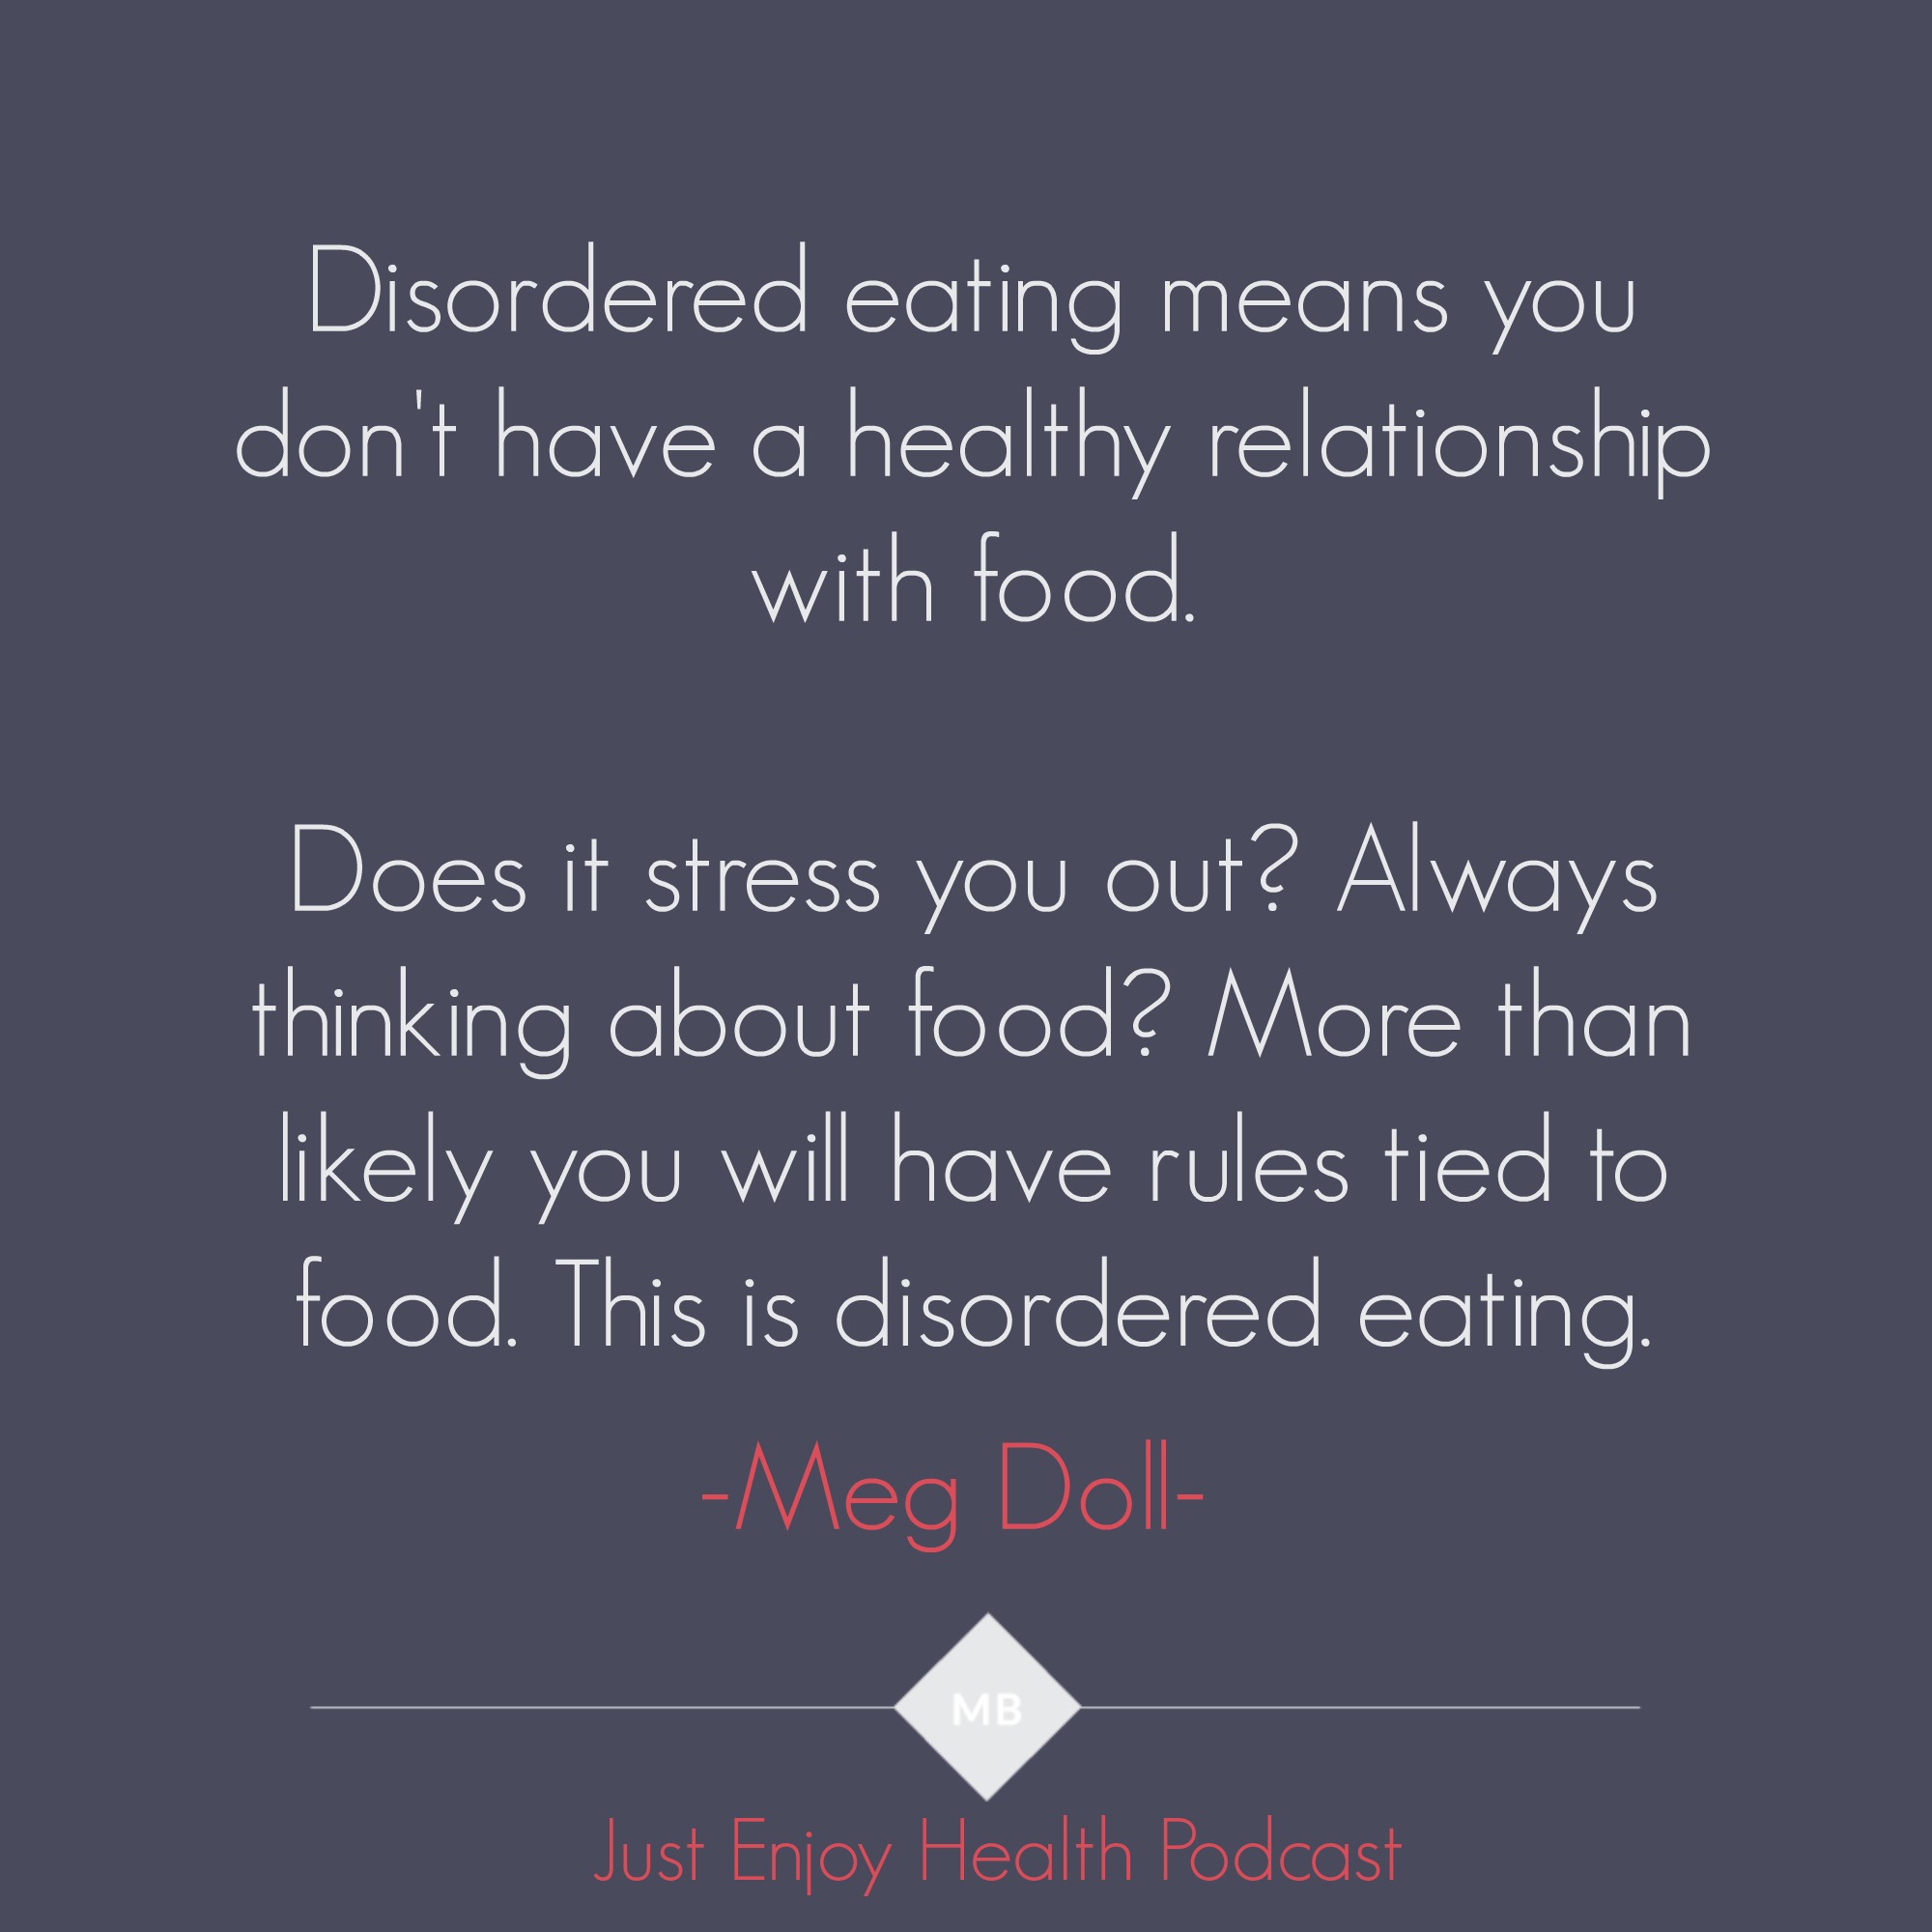 Just Enjoy Health Podcast Disordered Eating Quote from Meg Doll